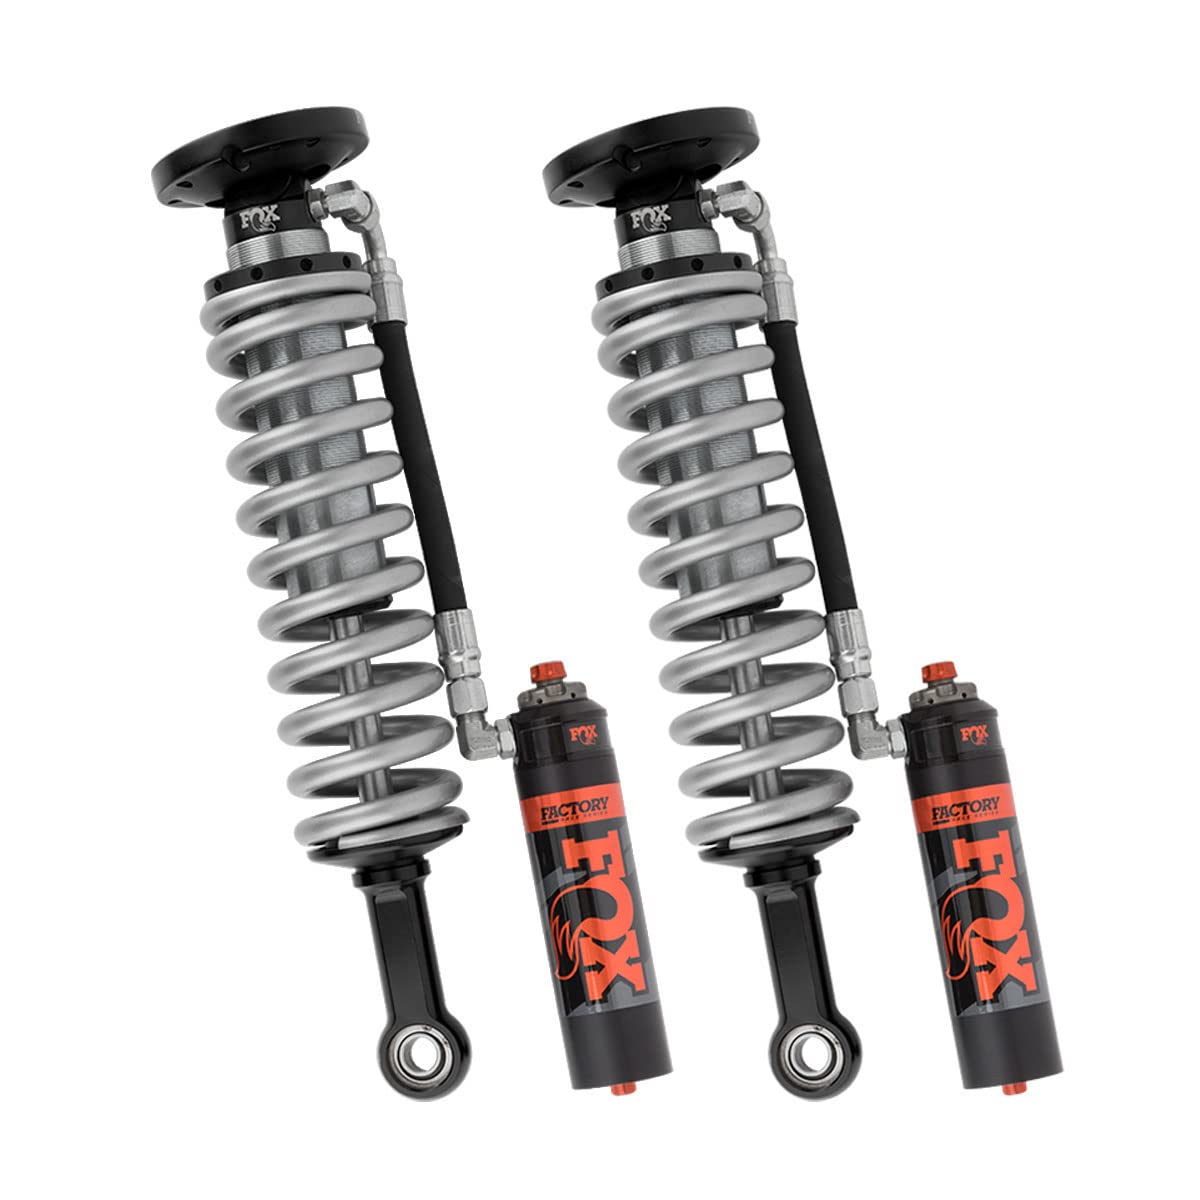 07-19 CHEVY/GMC 1500 FOX 2.5 FACTORY SERIES COIL-OVER IFP RESERVOIR SHOCKS SPRING RATE: 600